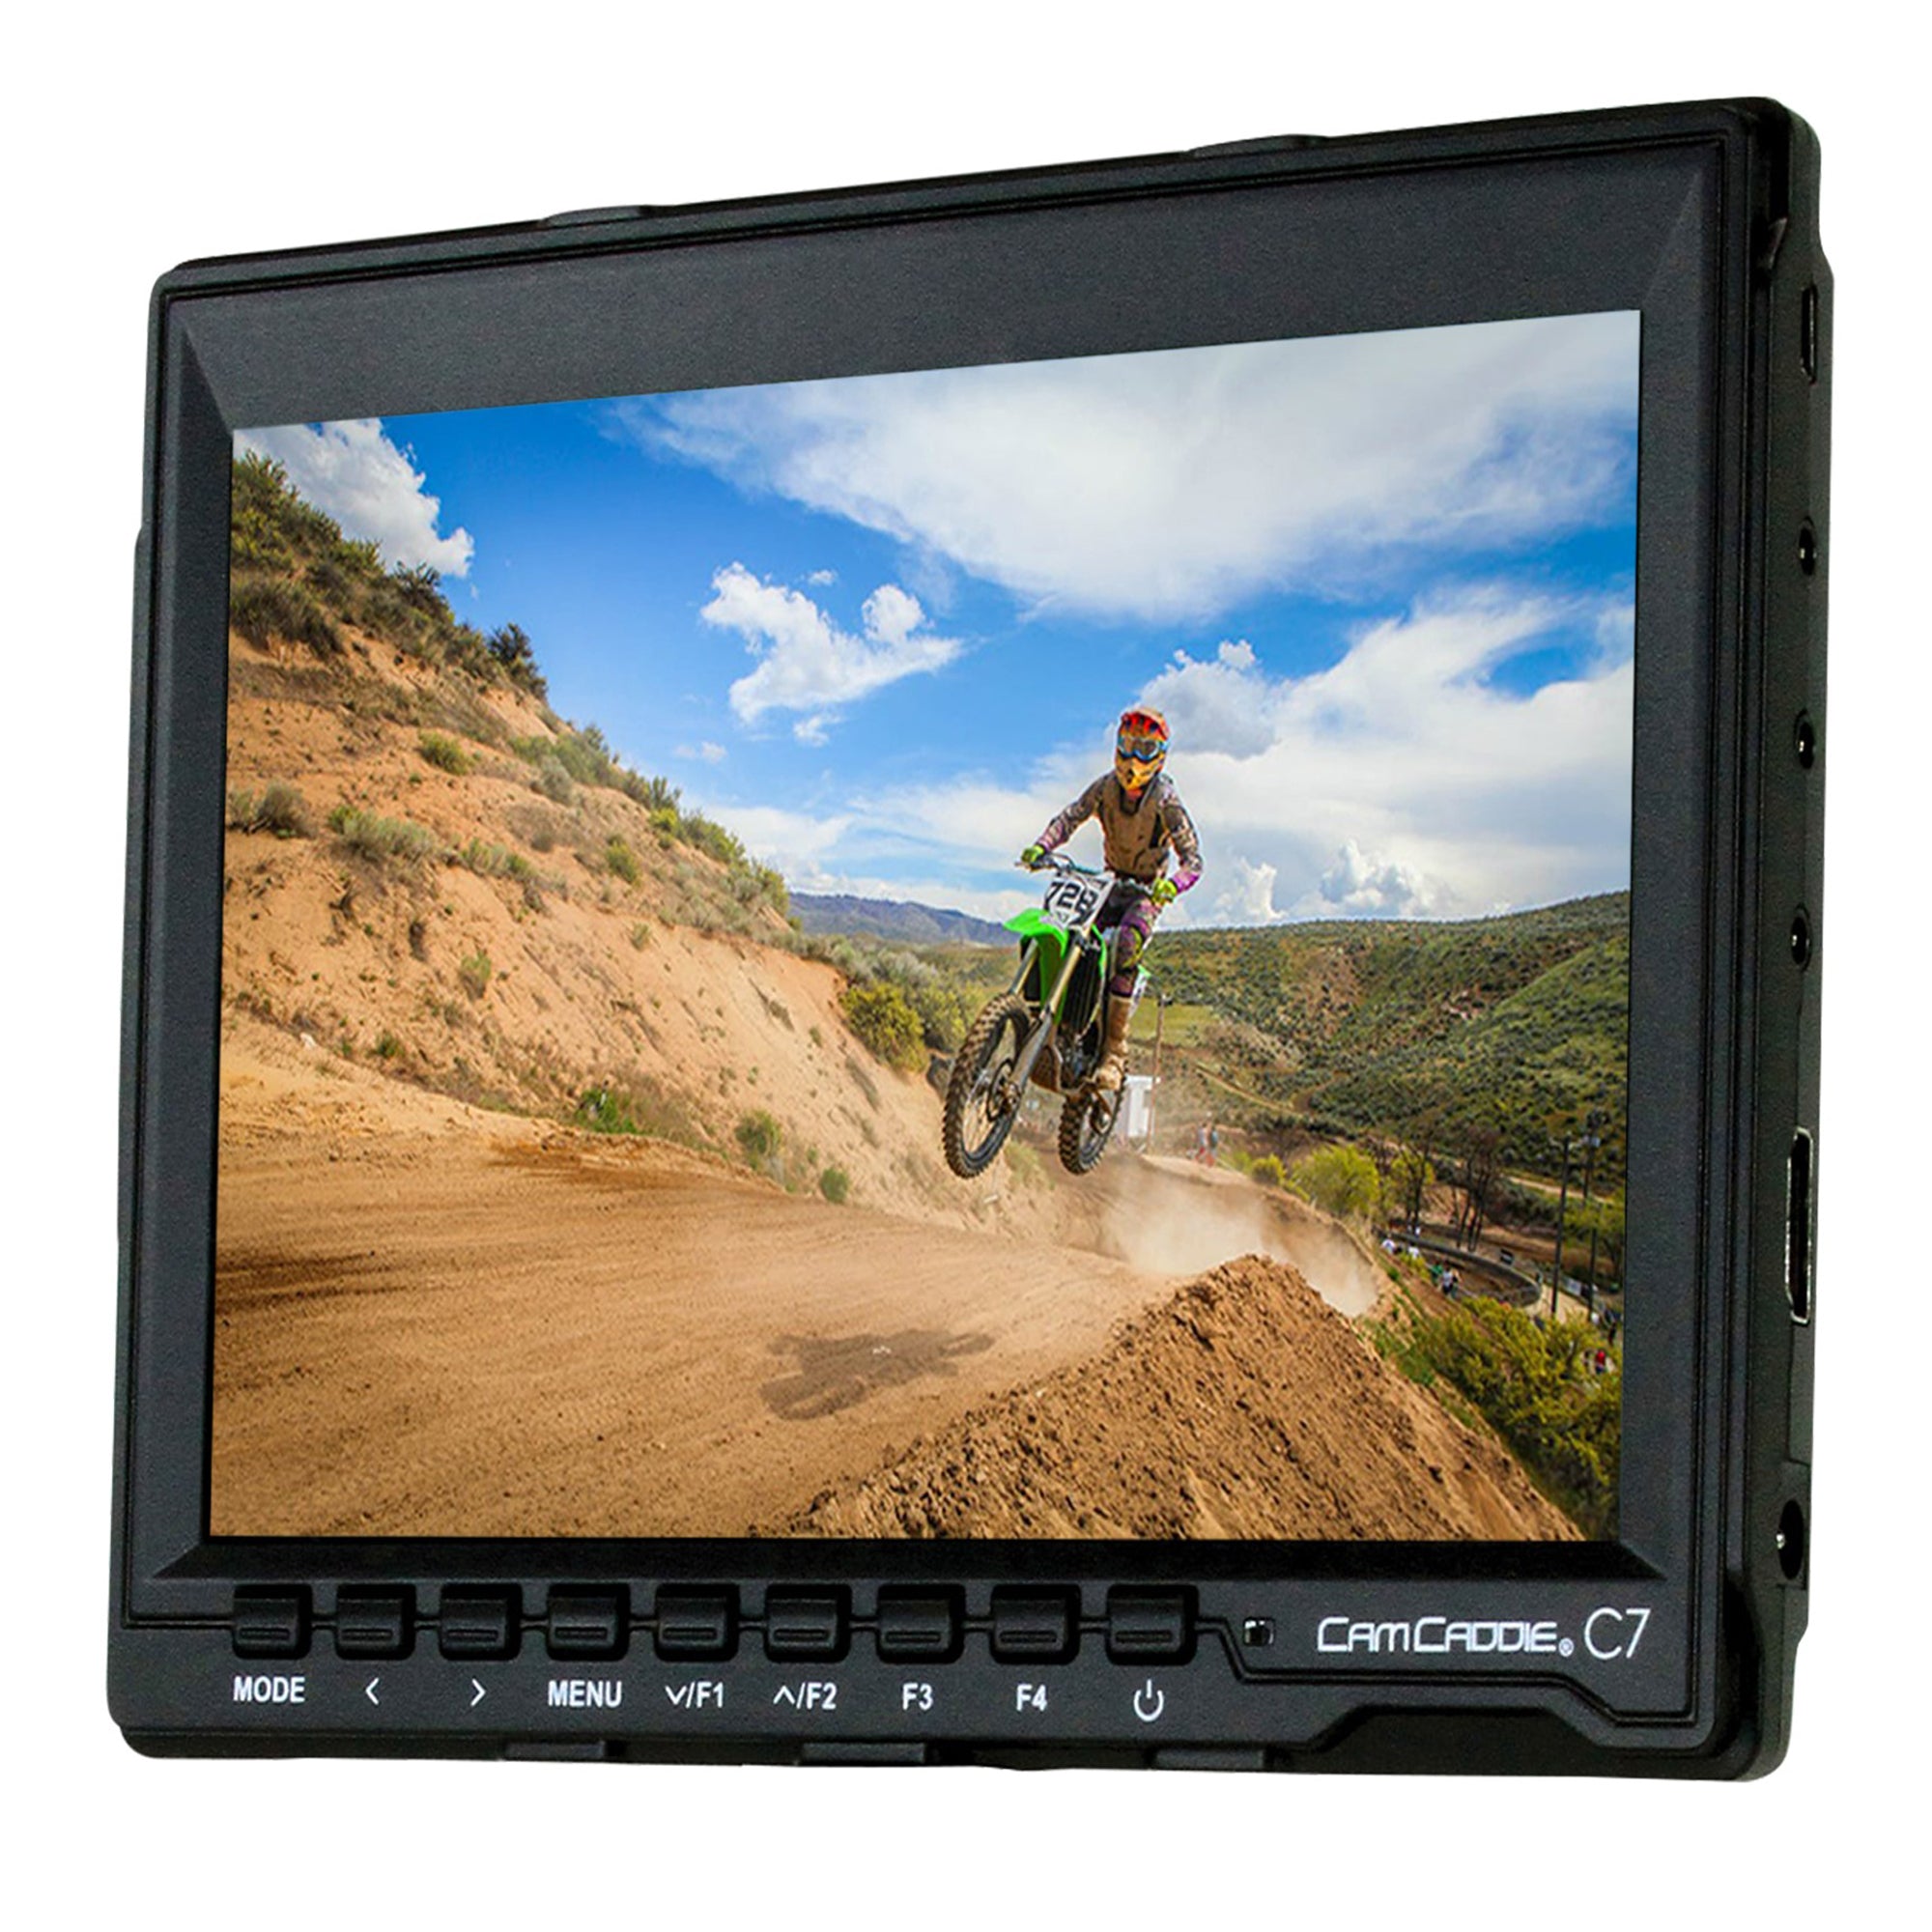 Cam Caddie C7 7" 1280 x 800 HD IPS Field Monitor with EU Compatible Power Supply - Cam Caddie - The Original Universal Stabilizing Camera Handle